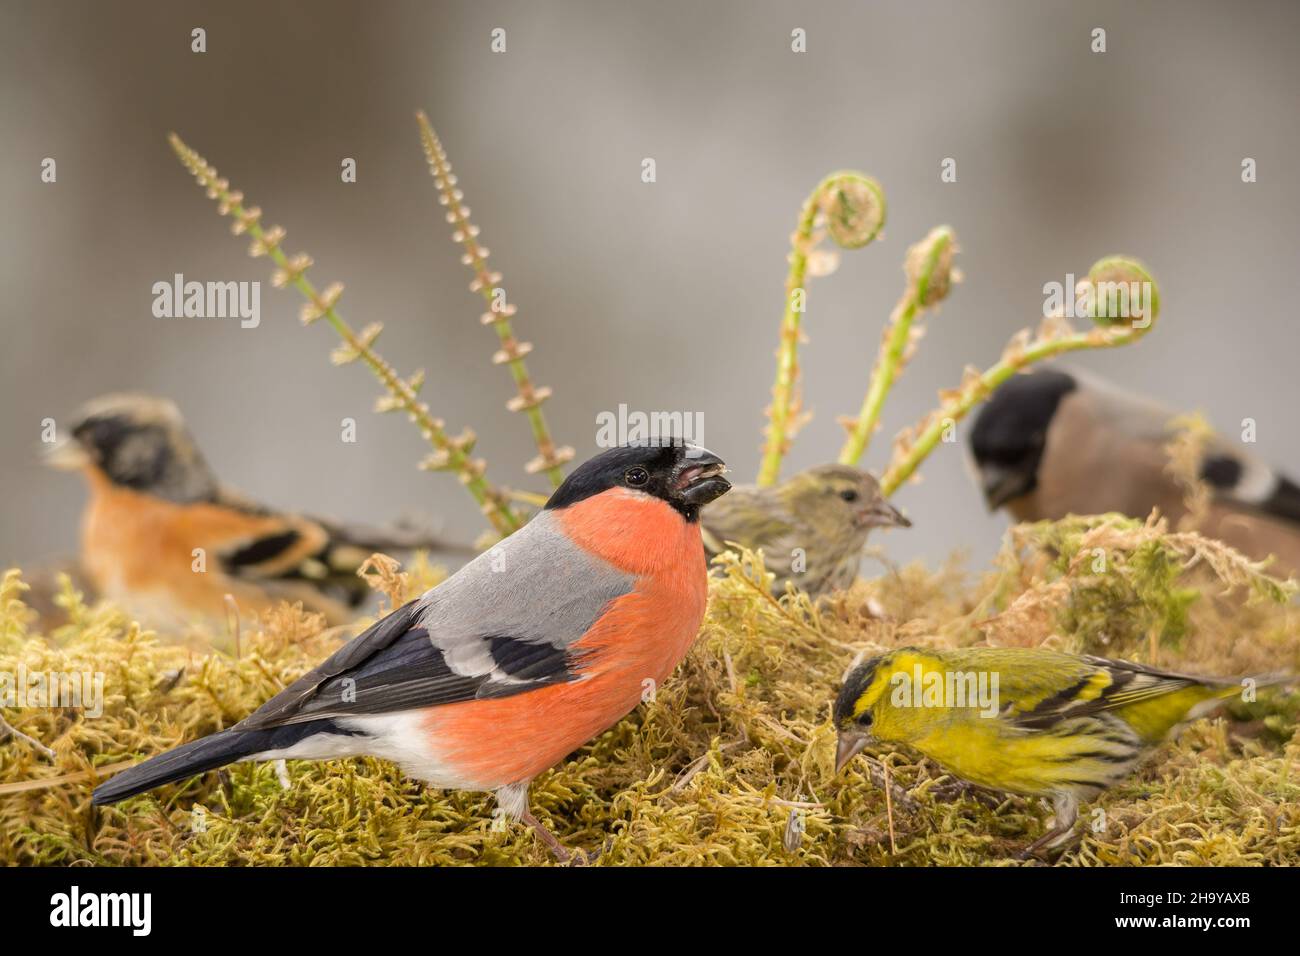 male bullfinch is  standing on moss with other birds Stock Photo